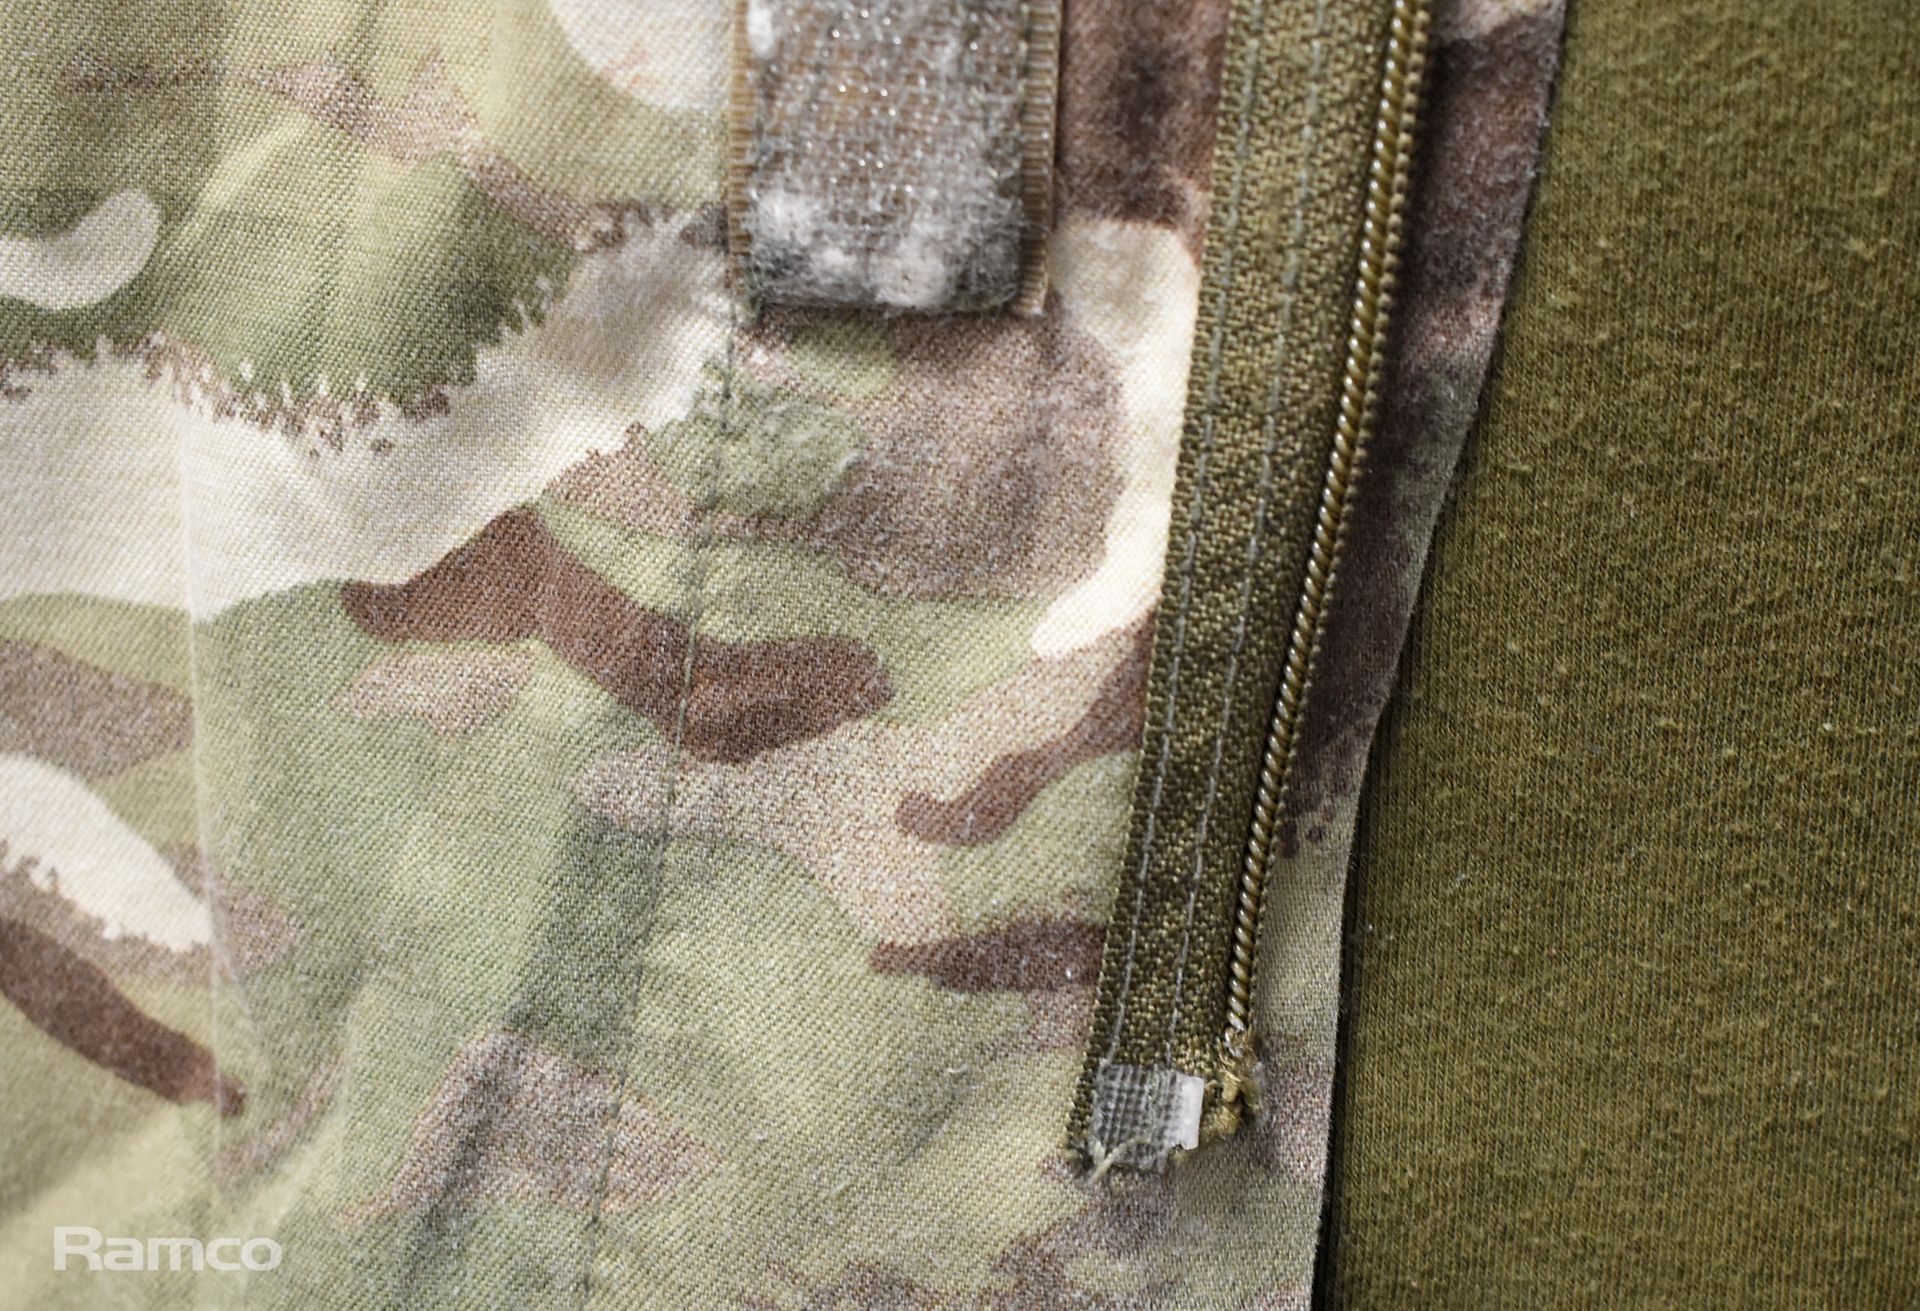 100x British Army MTP Combat jackets mixed styles - mixed grades and sizes - Image 6 of 16